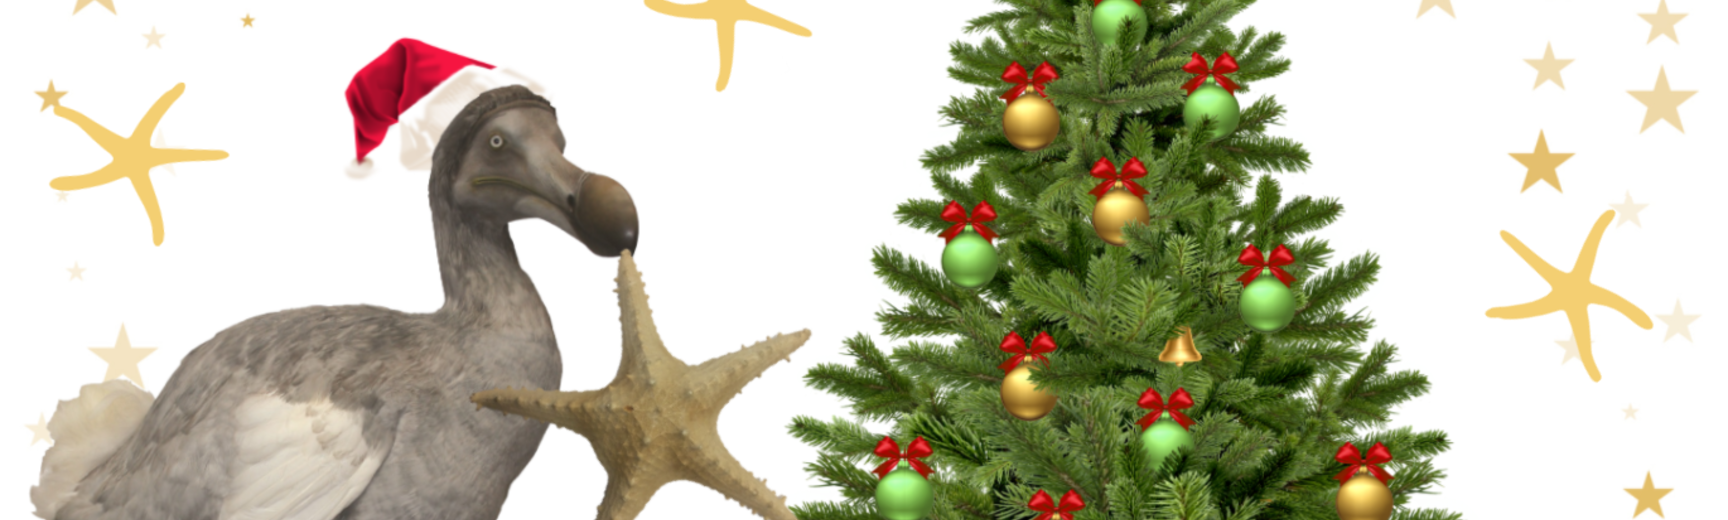 An image of a Christmas tree on the right with gold and red baubles, on the left side a grey Dodo wearing a red Christmas hat hold a starfish in its mouth. The image has a white background with stars around the outer edges. 